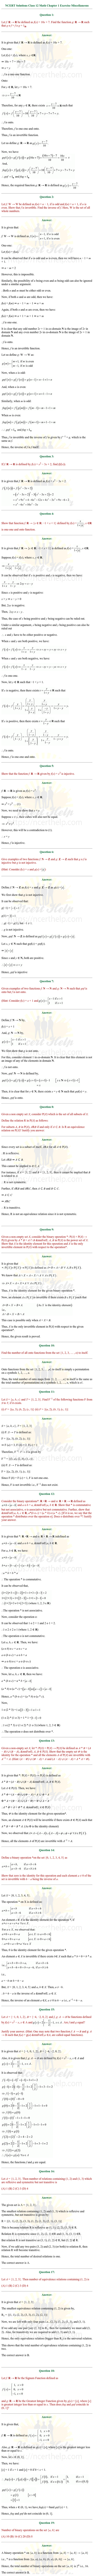 Ncert Solutions For Class 12 Chapter 1 Exercise Misss Relations And Functions